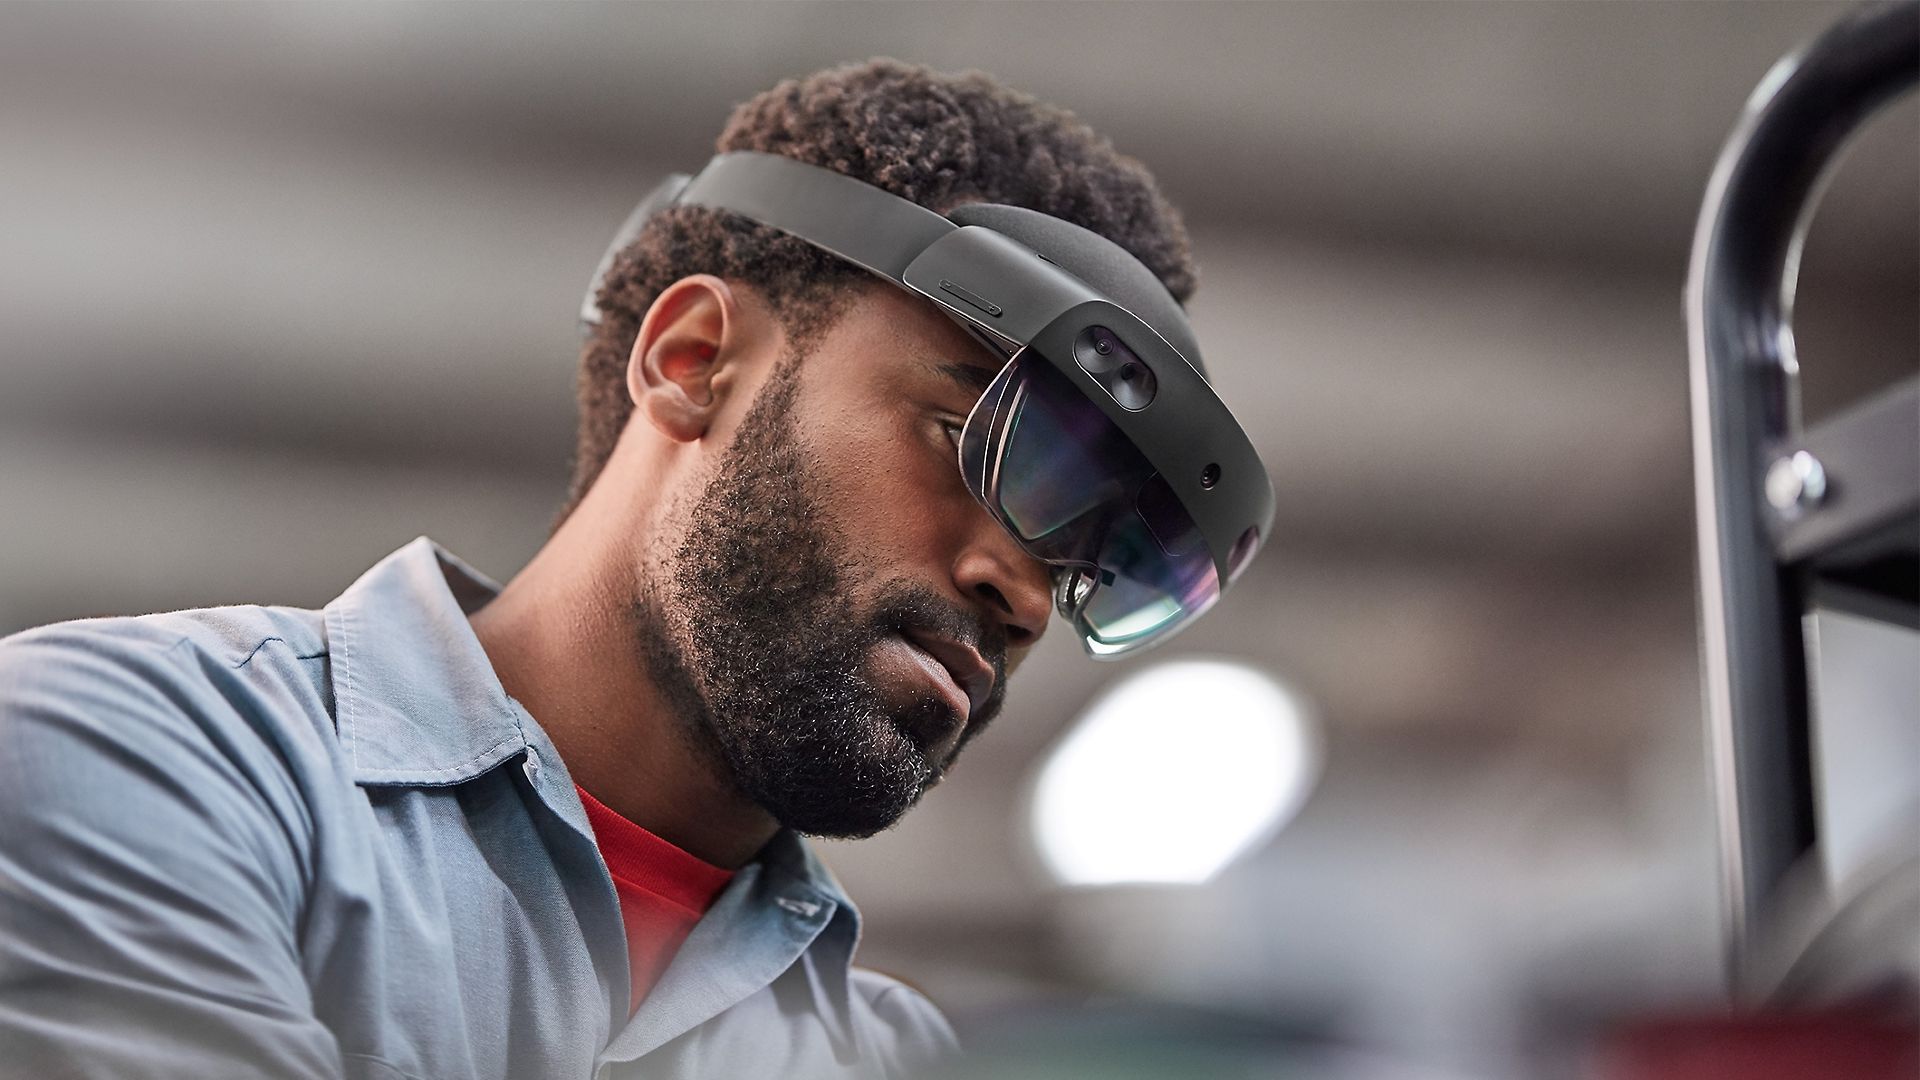 How To Be A HoloLens Partner